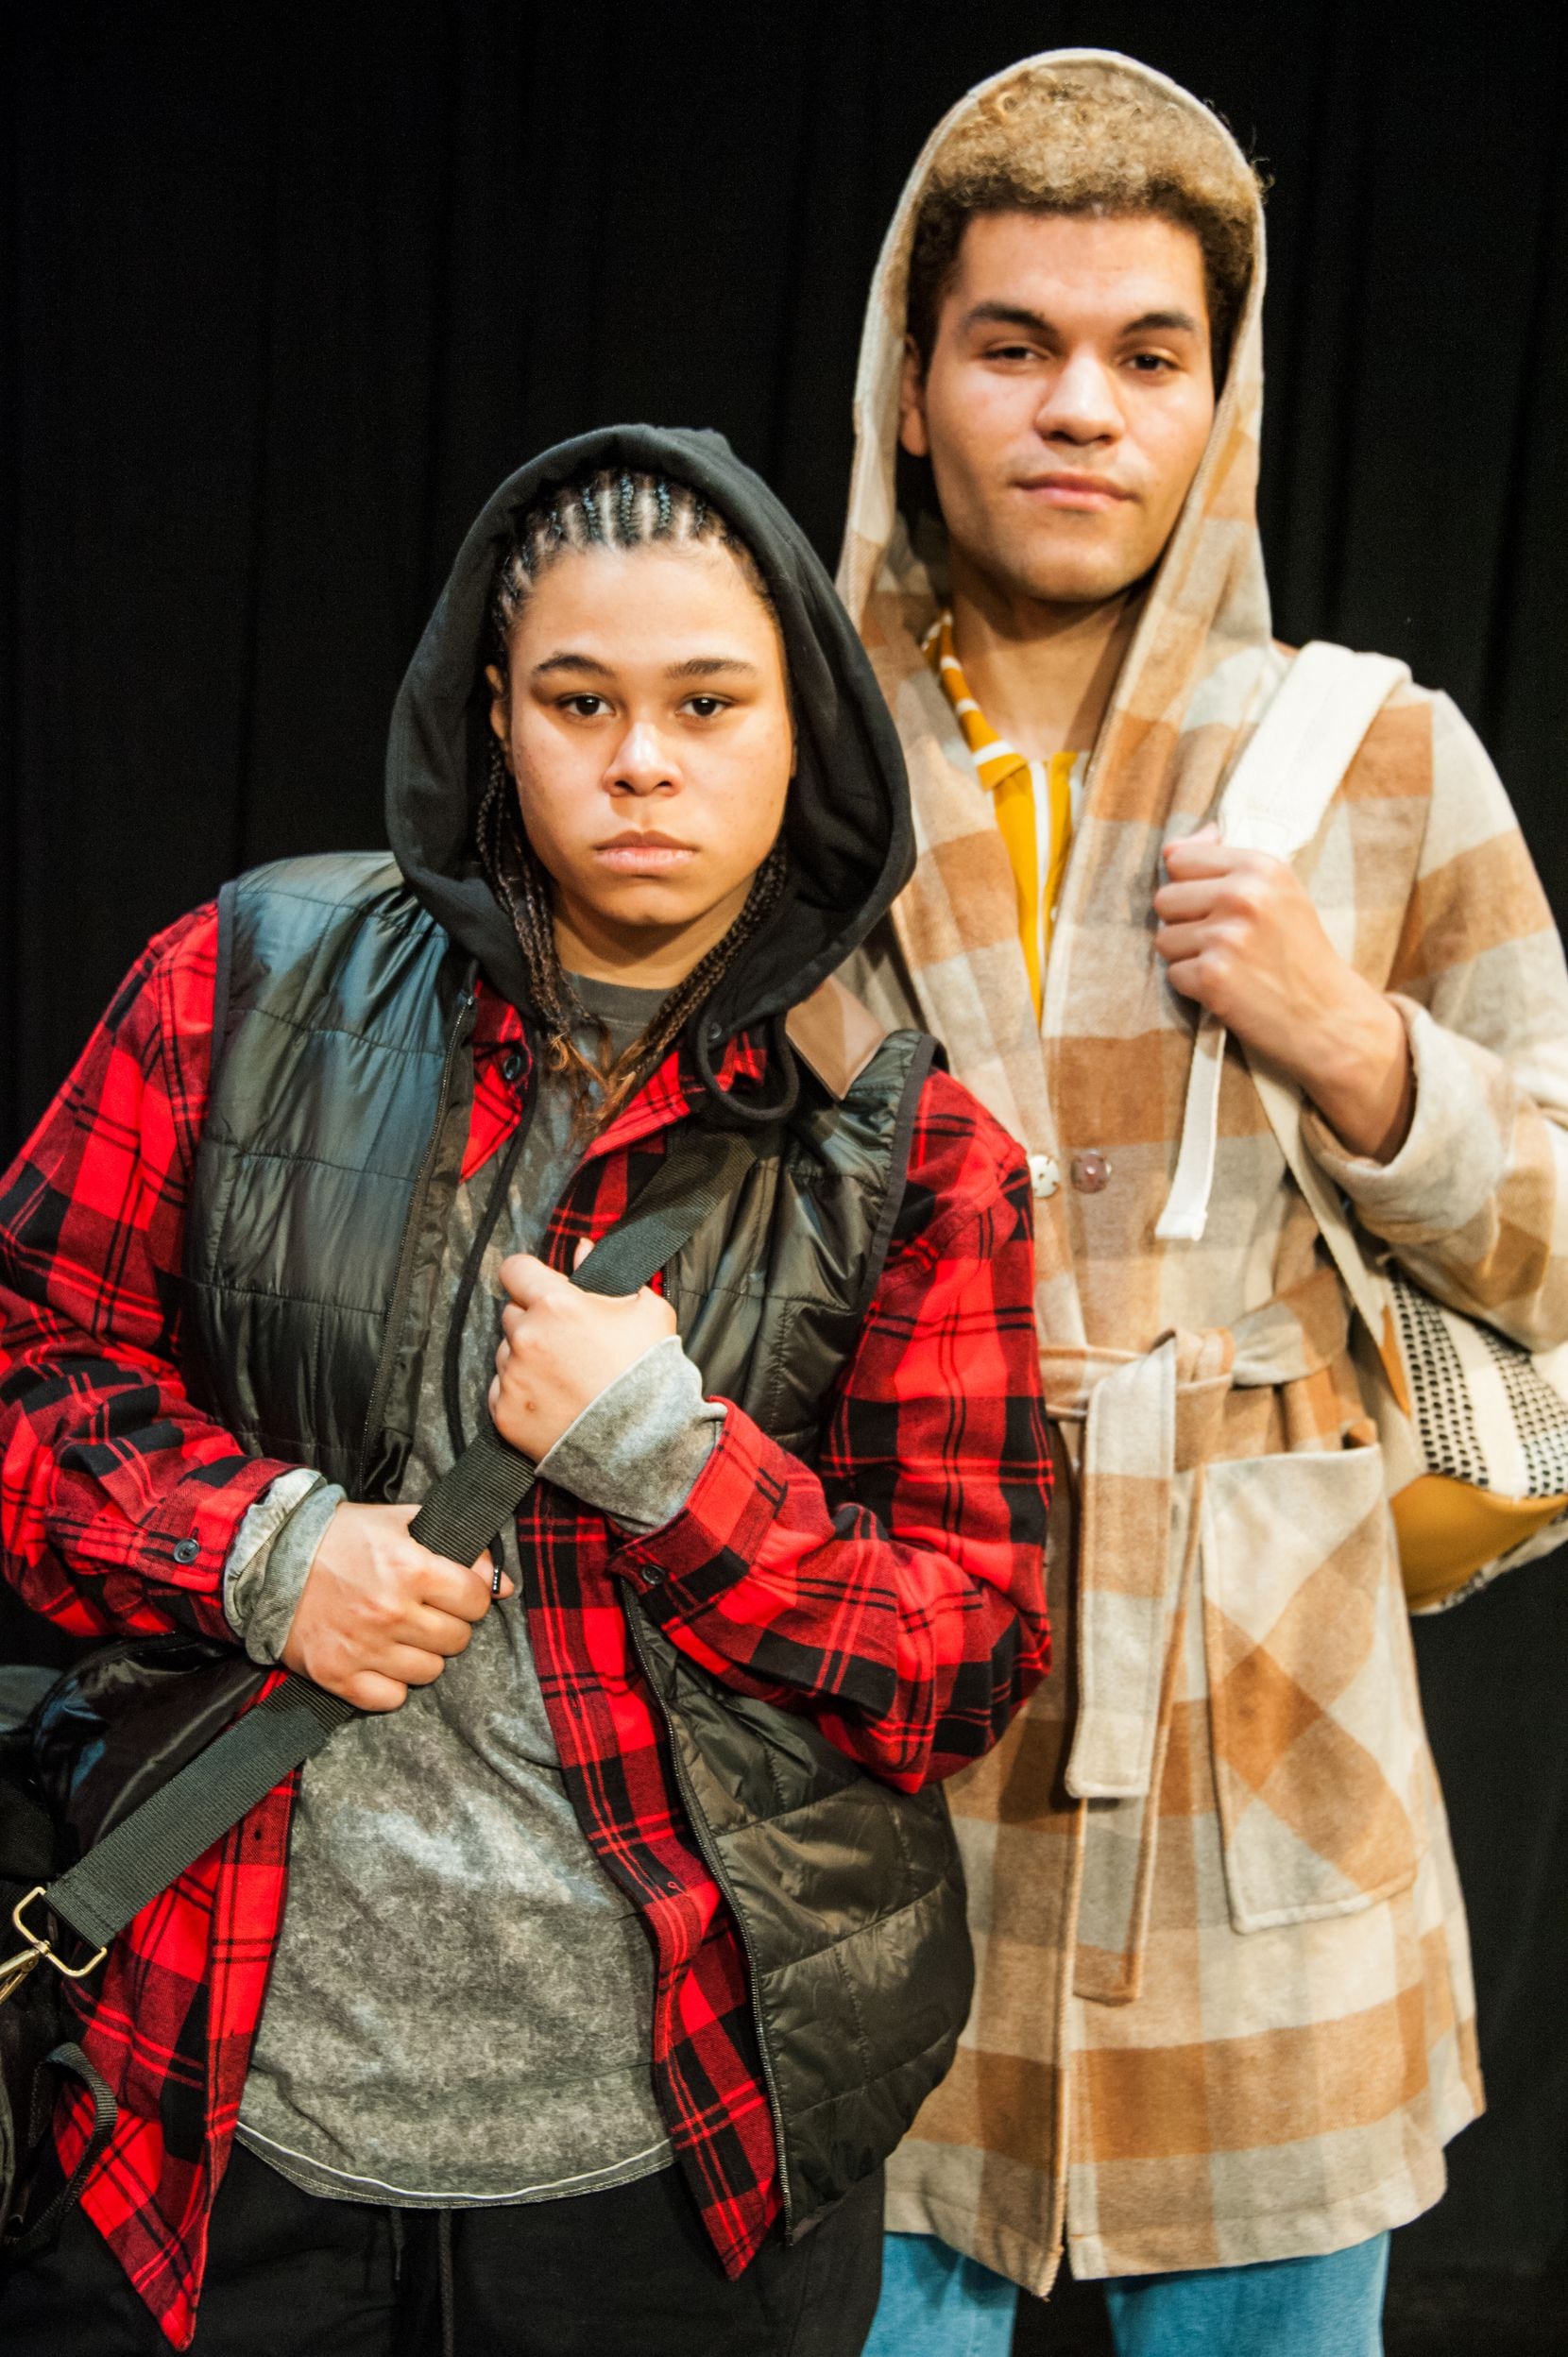 J Davis-Jones (left) and Dominic Pecikonis star as teenagers who fall in love at a Los Angeles homeless shelter in Cara Mia Theatre Co.'s production of Detroit playwright Emilio Rodriguez's "Swimming While Drowning."